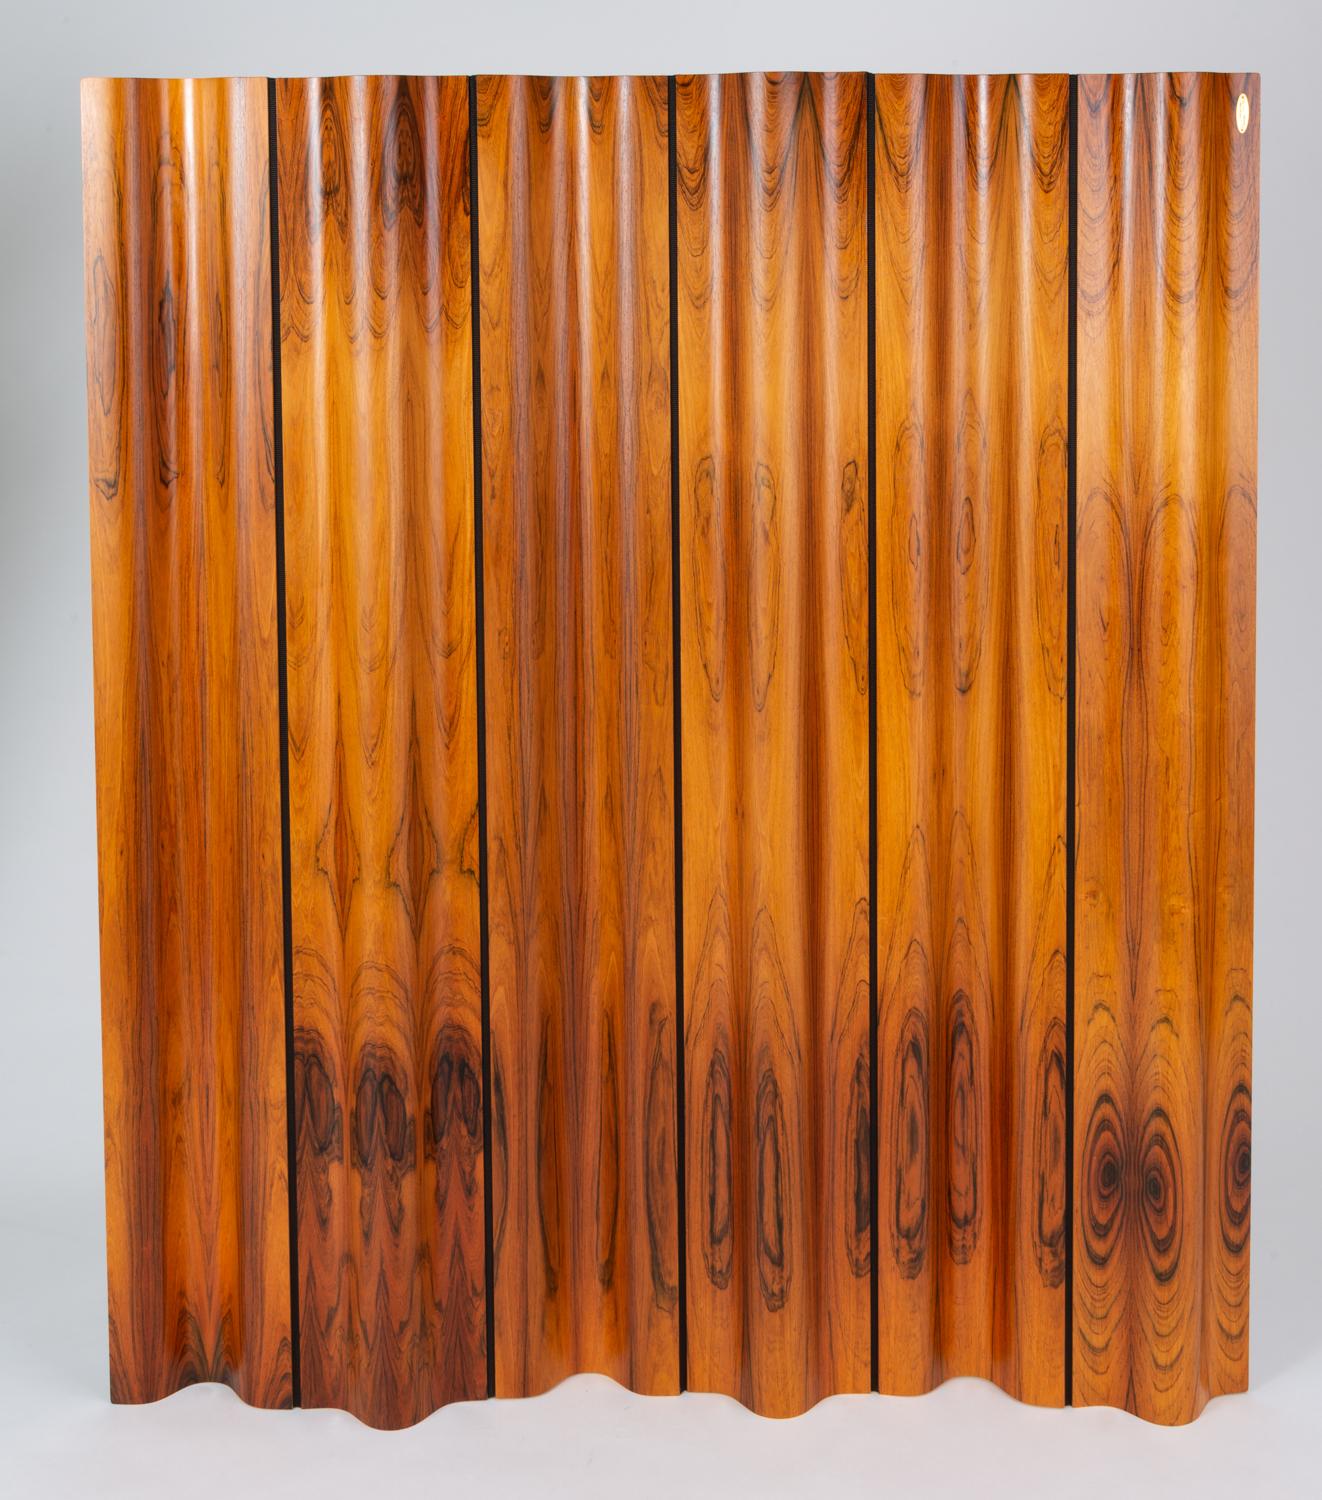 Ray and Charles Eames’ iconic folding screen for Herman Miller, seen here in rosewood. The undulating design is composed of articulated panels of curved rosewood, joined by a supple brown fabric, for a high level of flexibility in positioning.